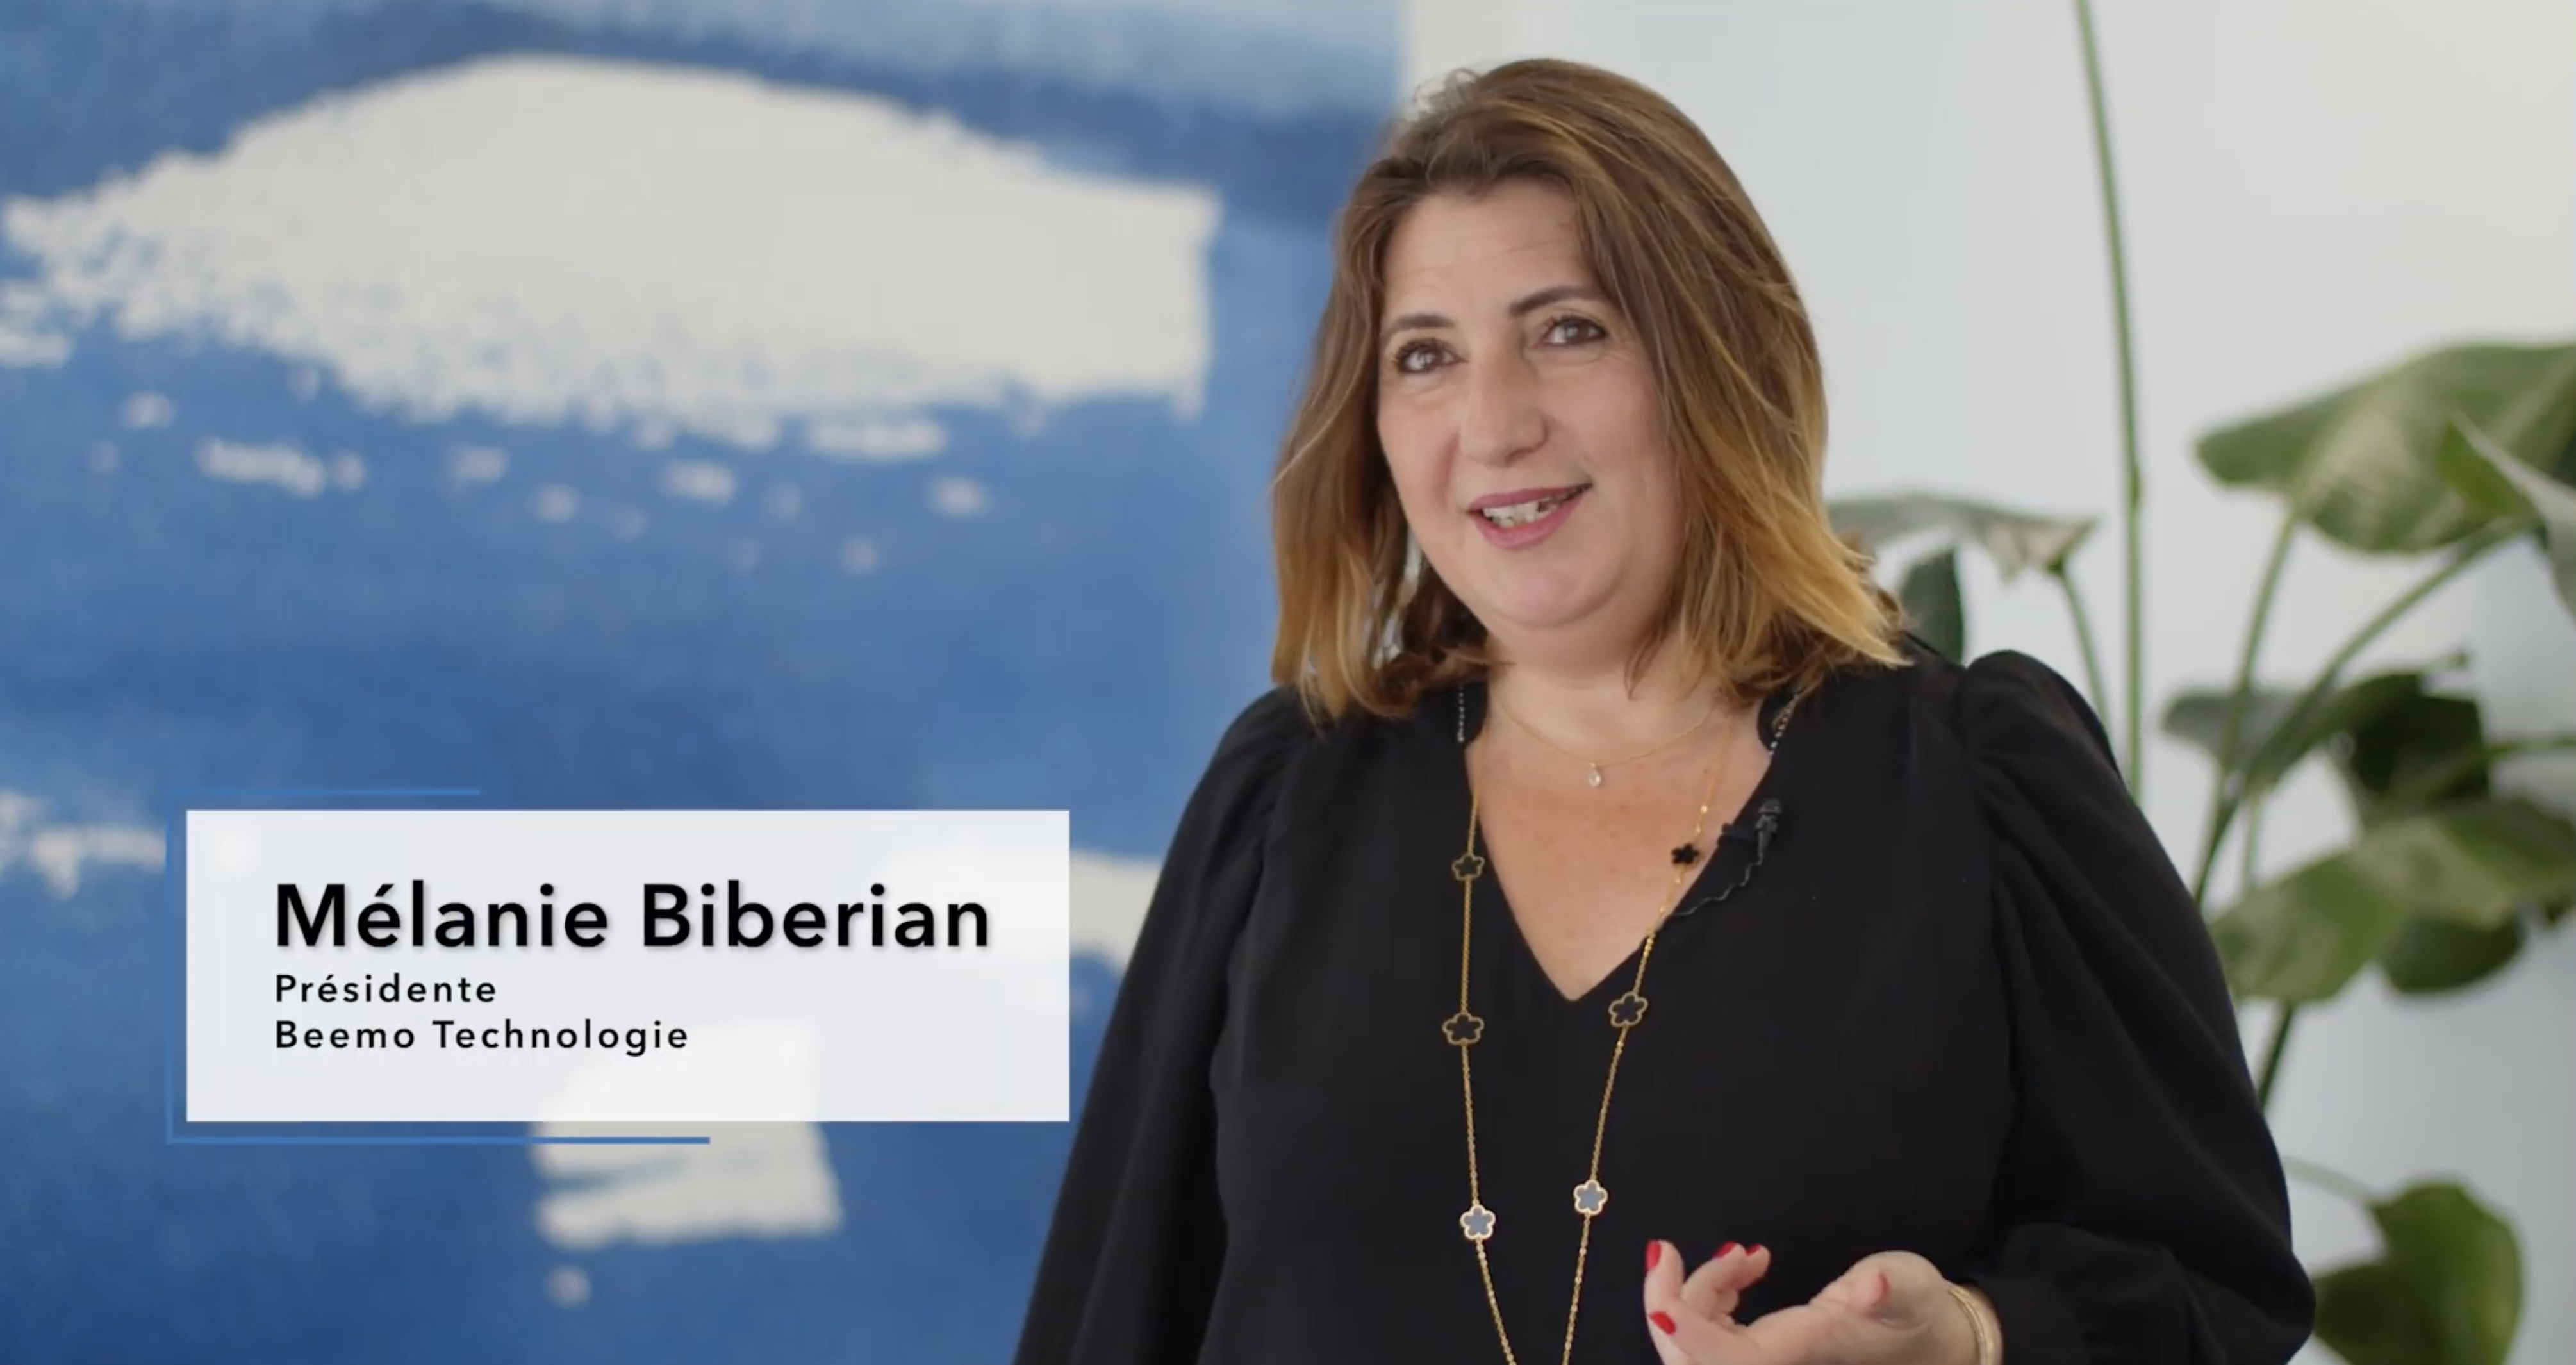 Interview of Mélanie Biberian for Le Point